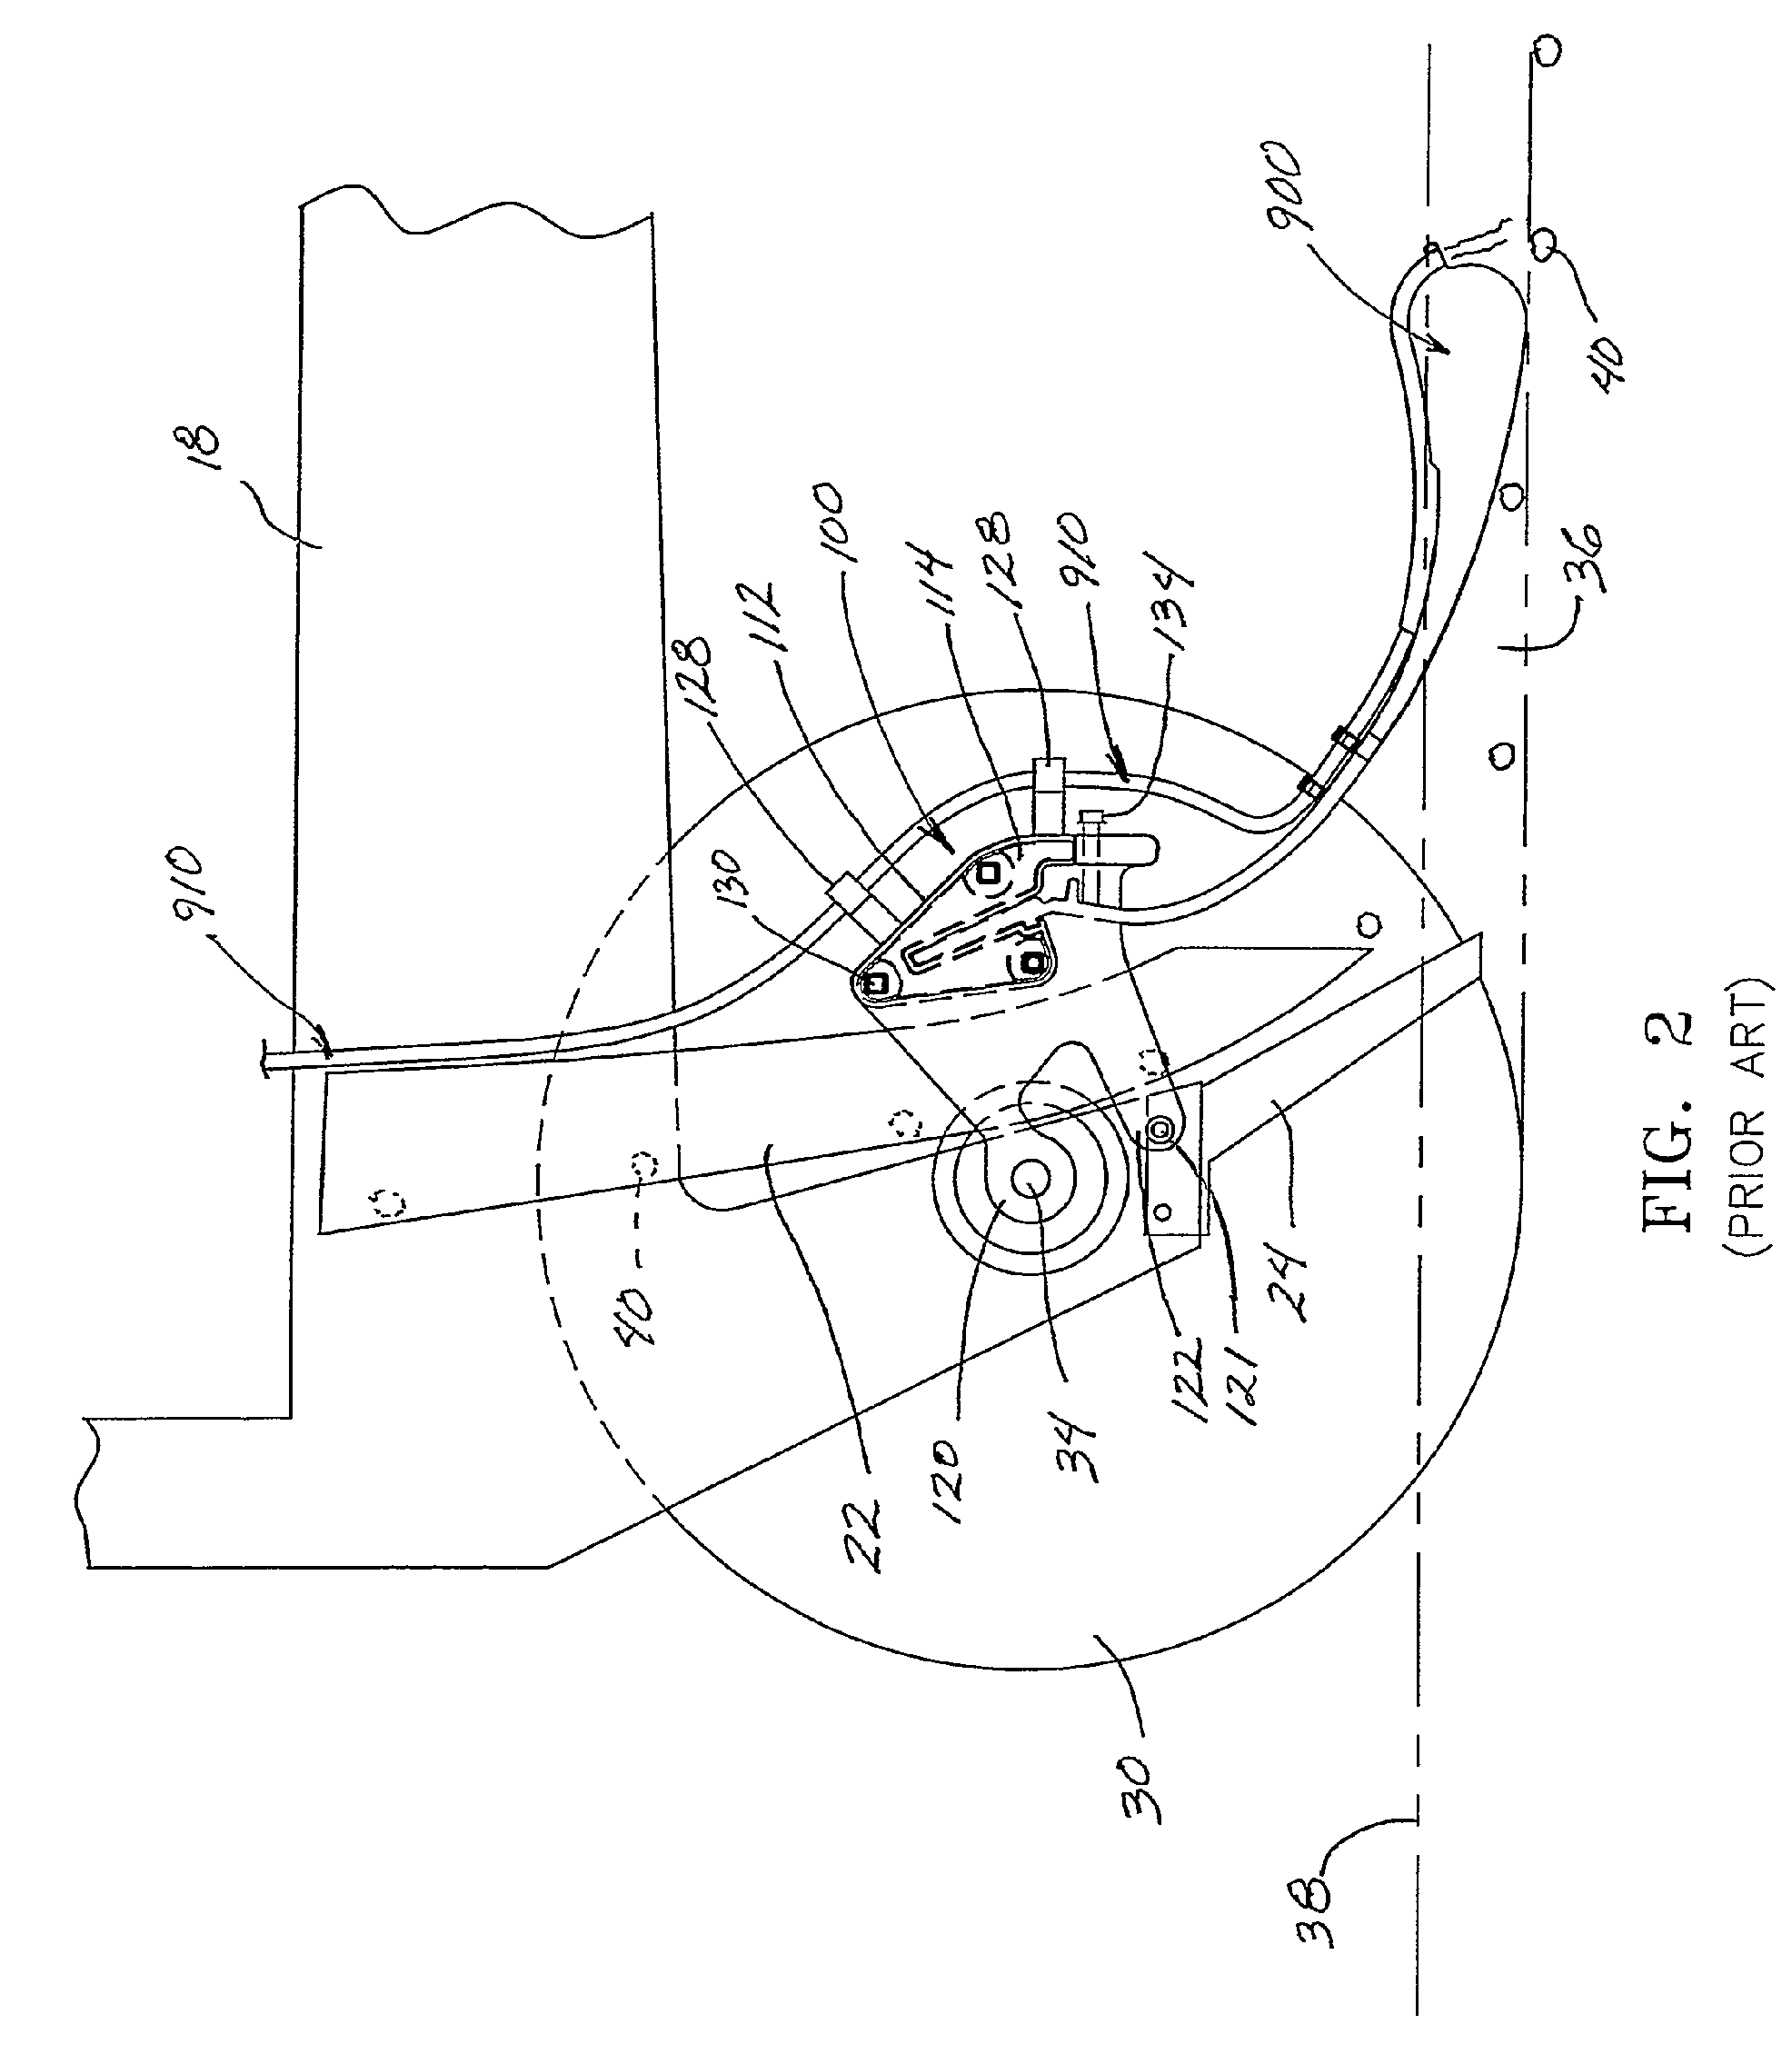 Planter bracket assembly for supporting appurtenances in substantial alignment with the seed tube